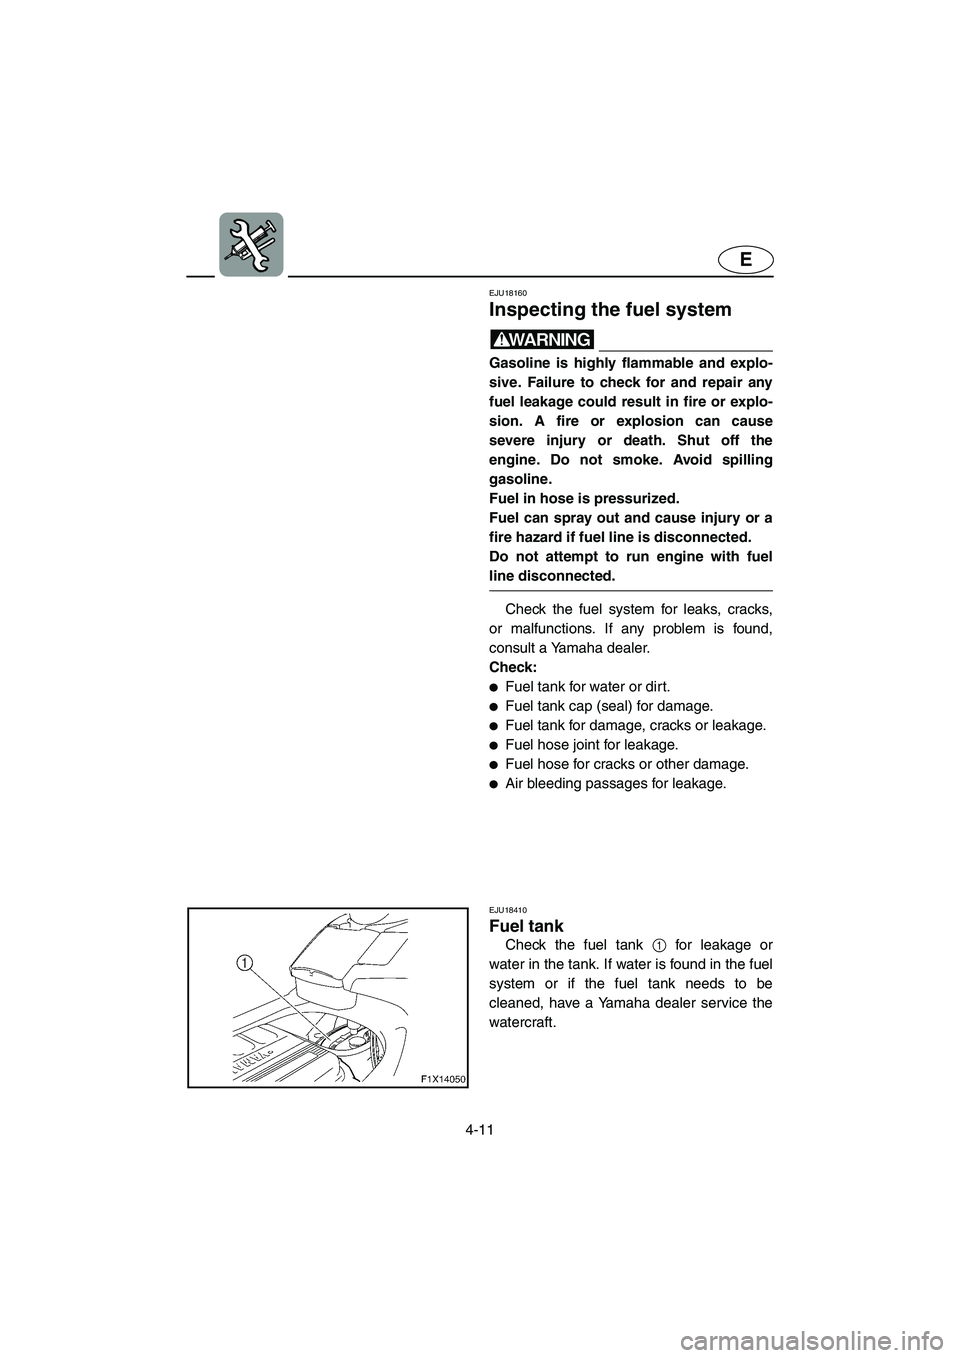 YAMAHA FX HO 2006  Owners Manual 4-11
E
EJU18160 
Inspecting the fuel system 
WARNING@ Gasoline is highly flammable and explo-
sive. Failure to check for and repair any
fuel leakage could result in fire or explo-
sion. A fire or expl